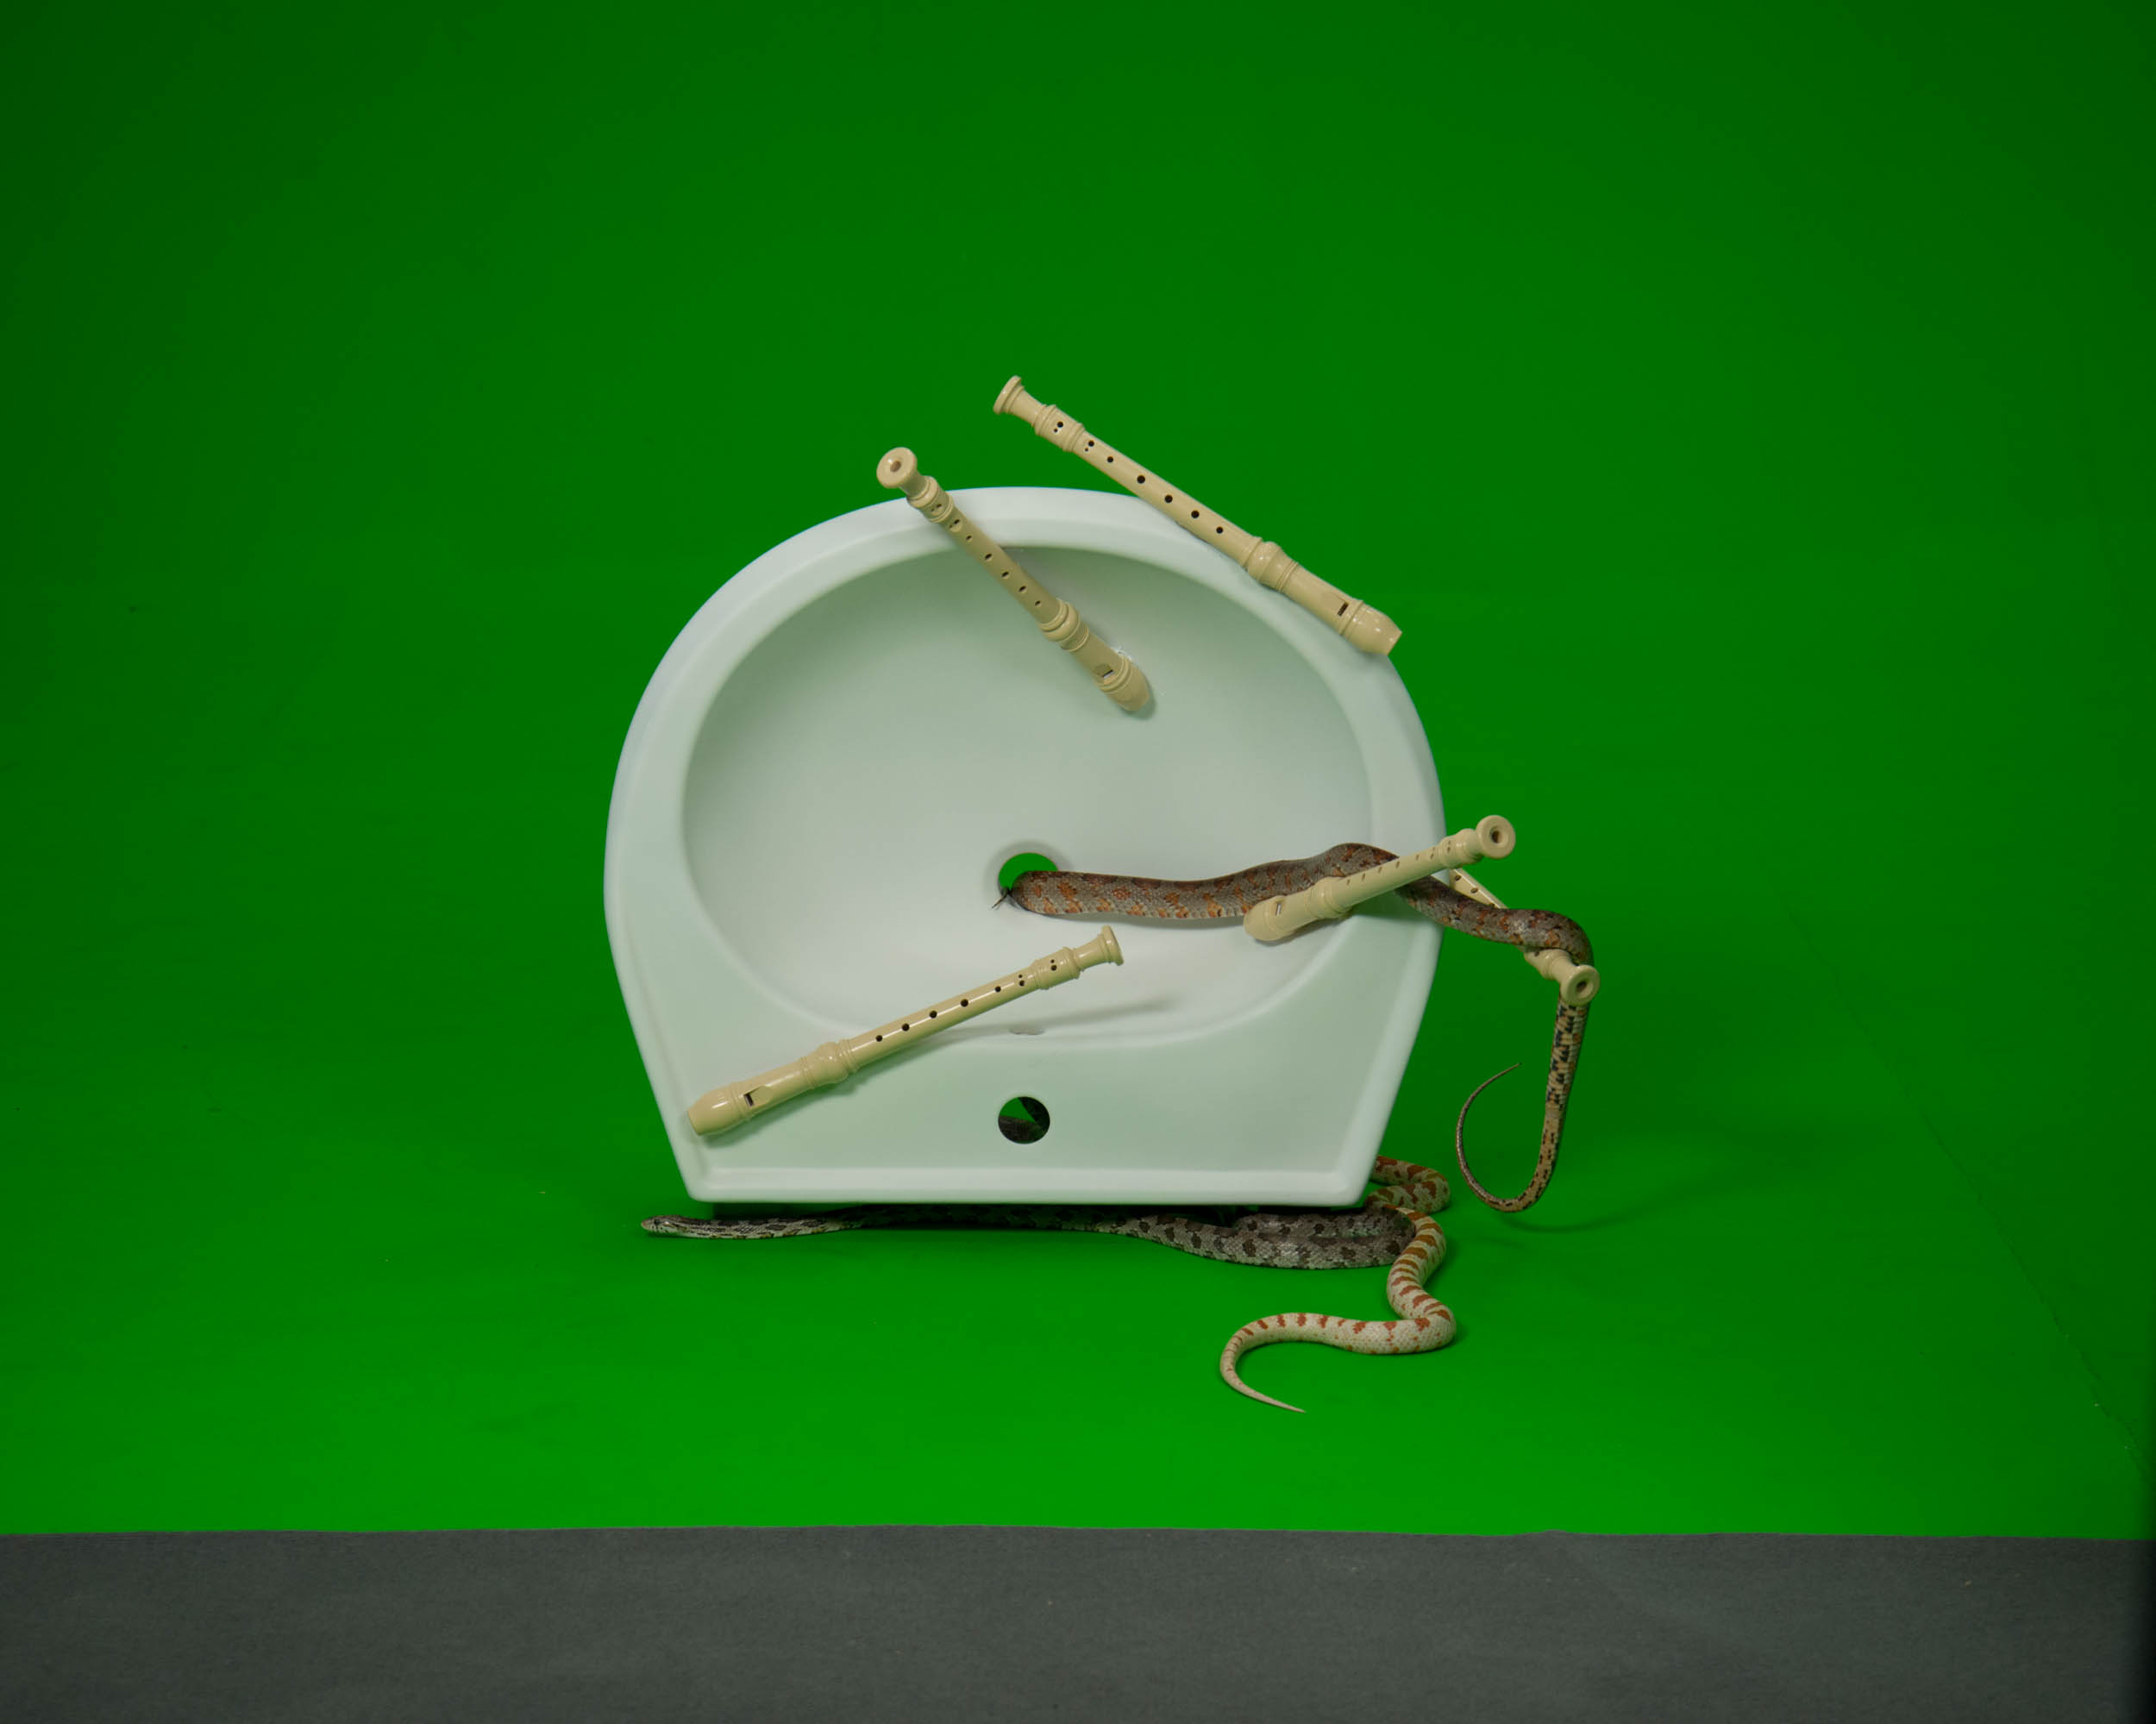 sink viewed from the top with snakes and flutes around it in front of a green screen background